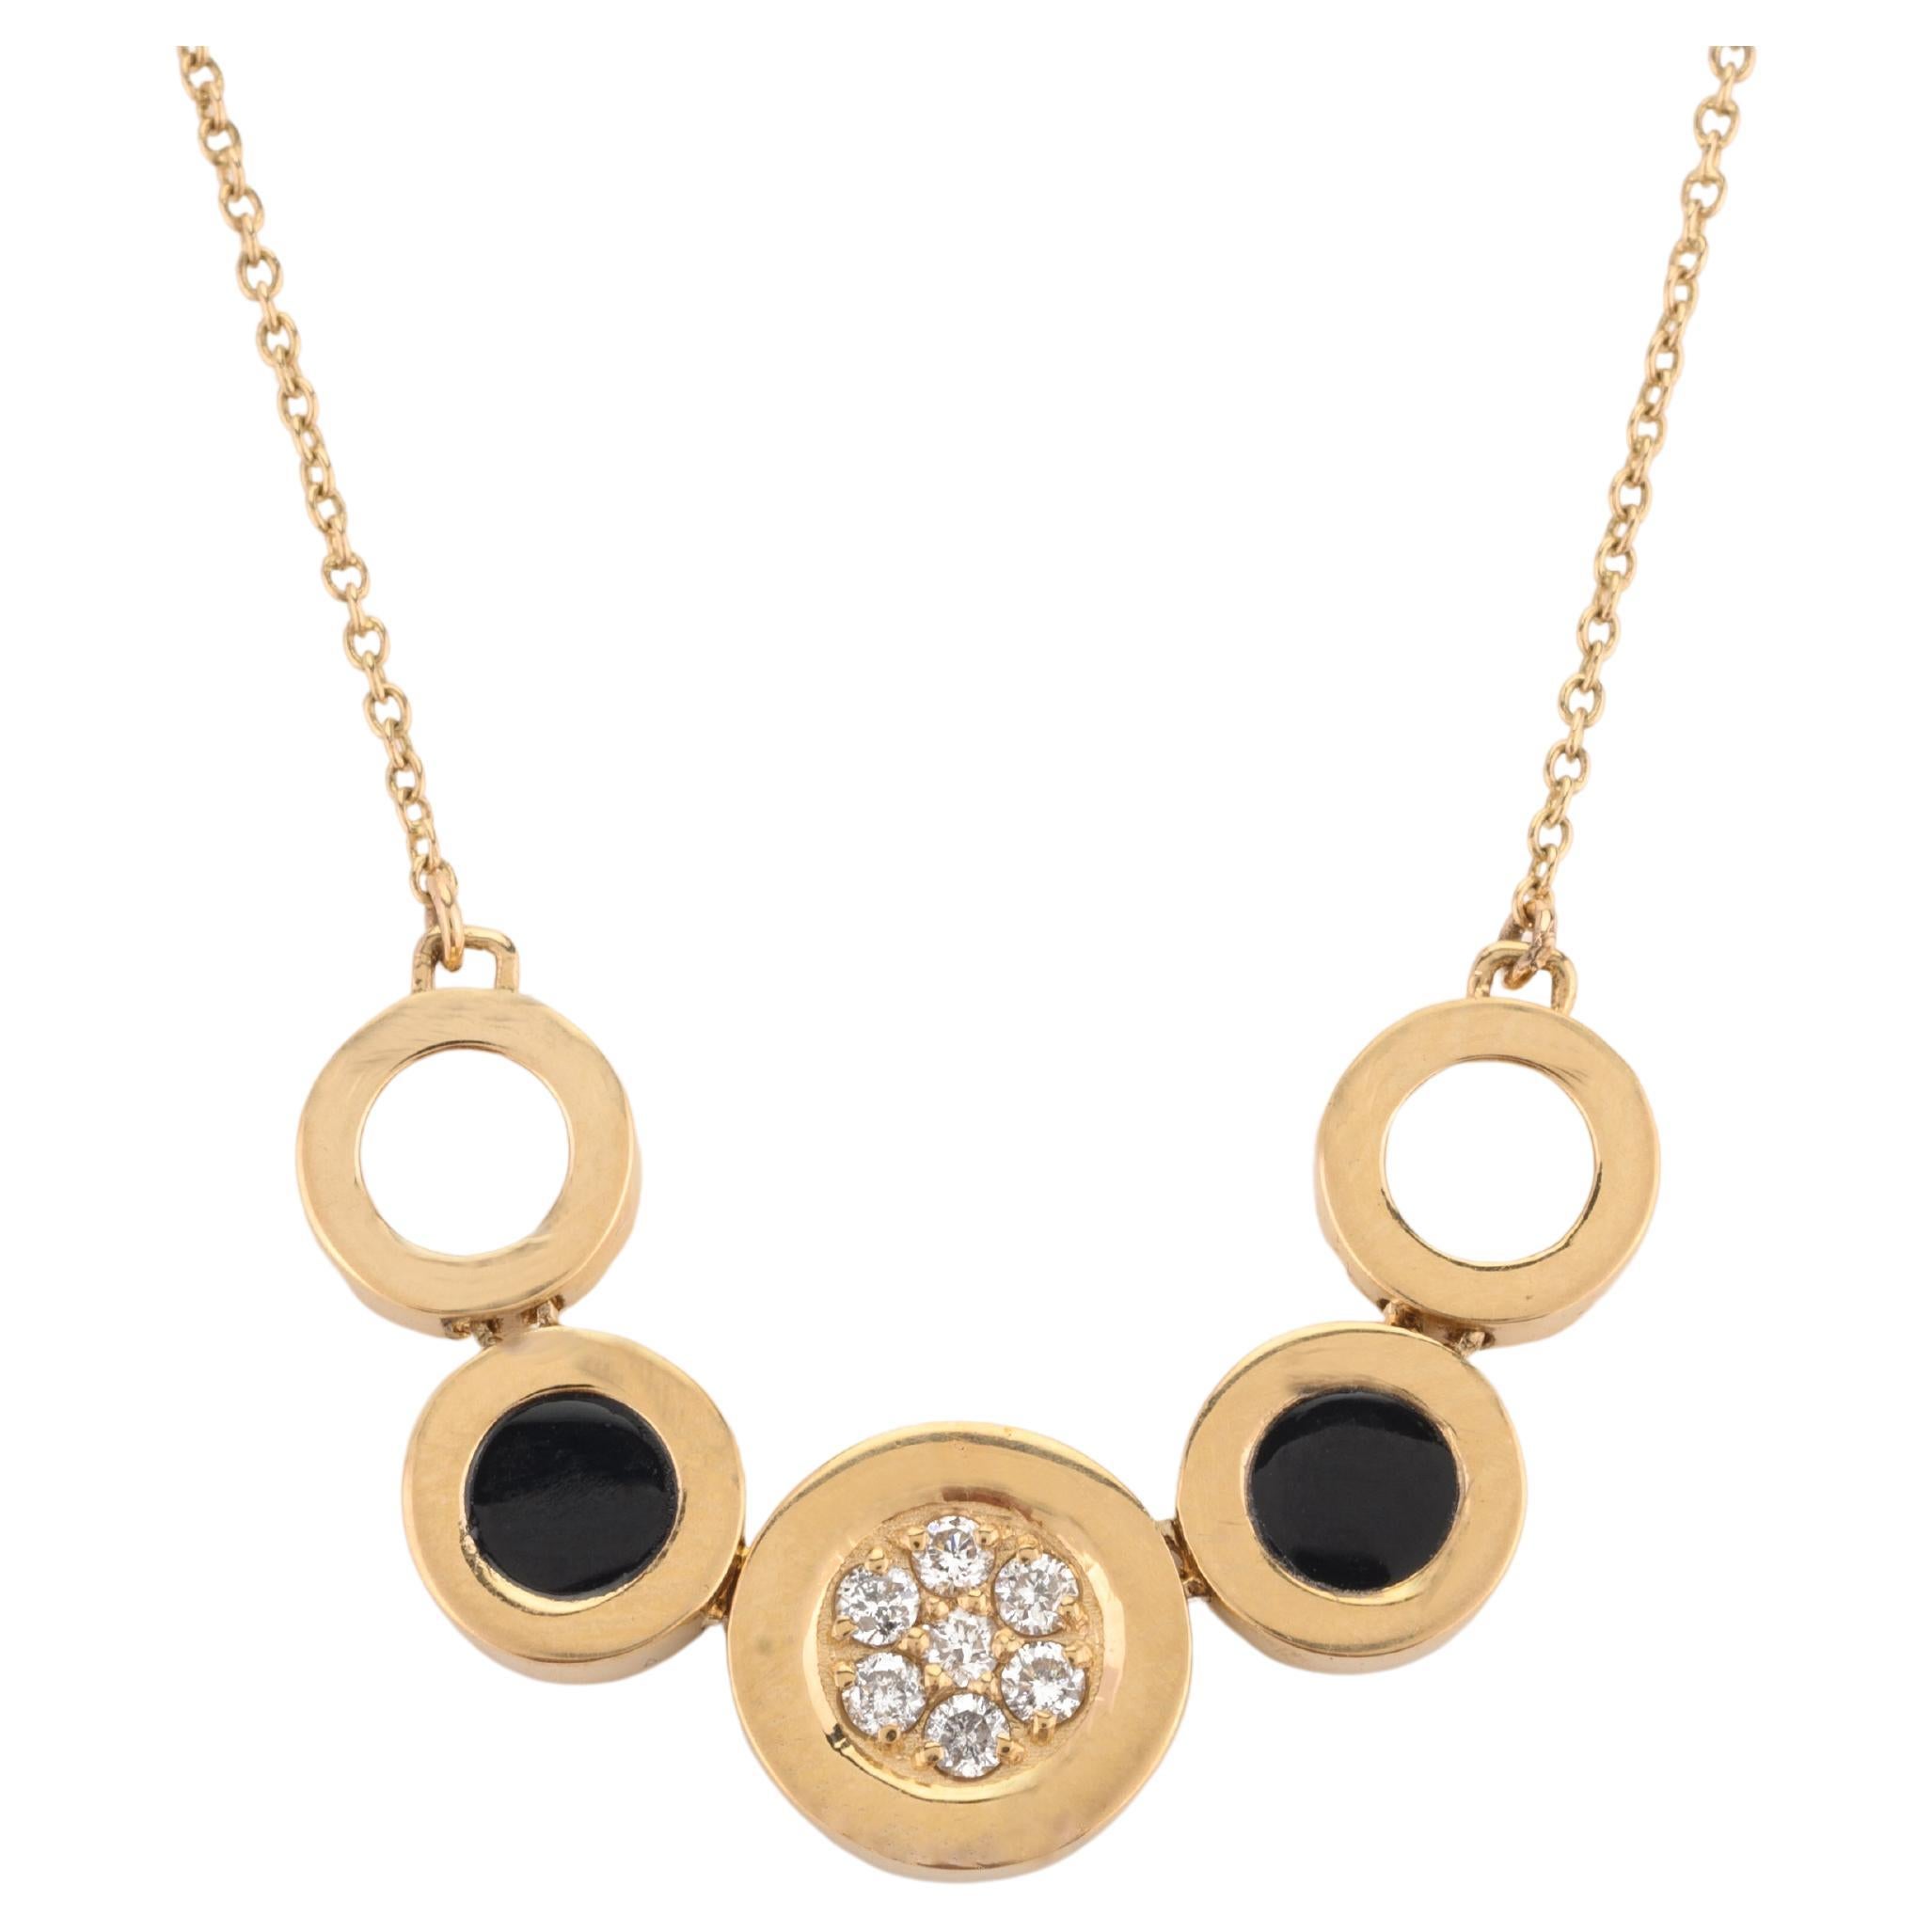 Unique Black Onyx and Diamond Chain Necklaces in 14k Solid Yellow Gold